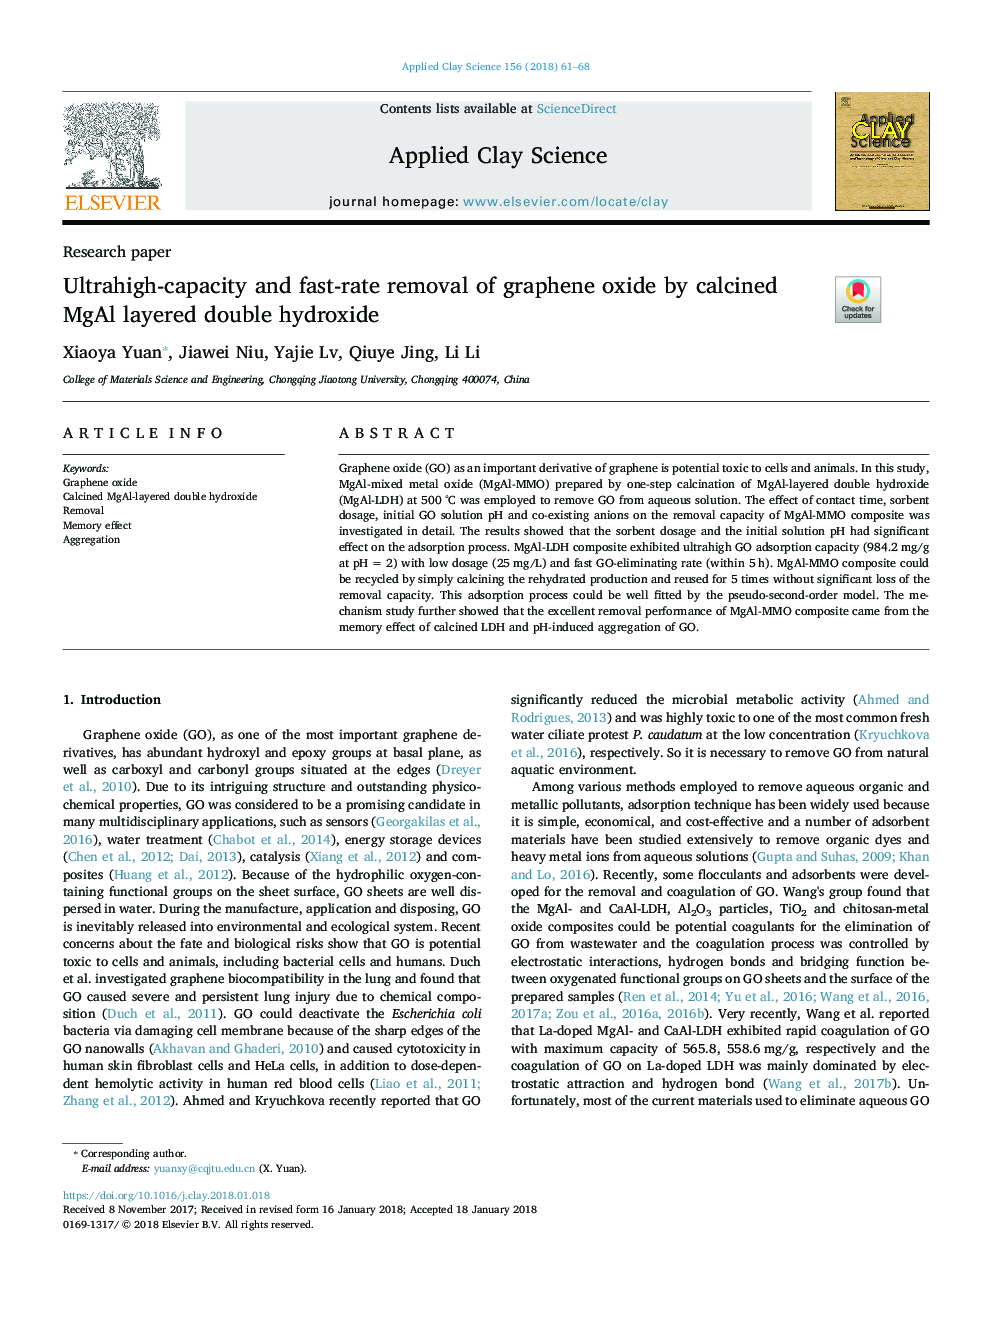 Ultrahigh-capacity and fast-rate removal of graphene oxide by calcined MgAl layered double hydroxide